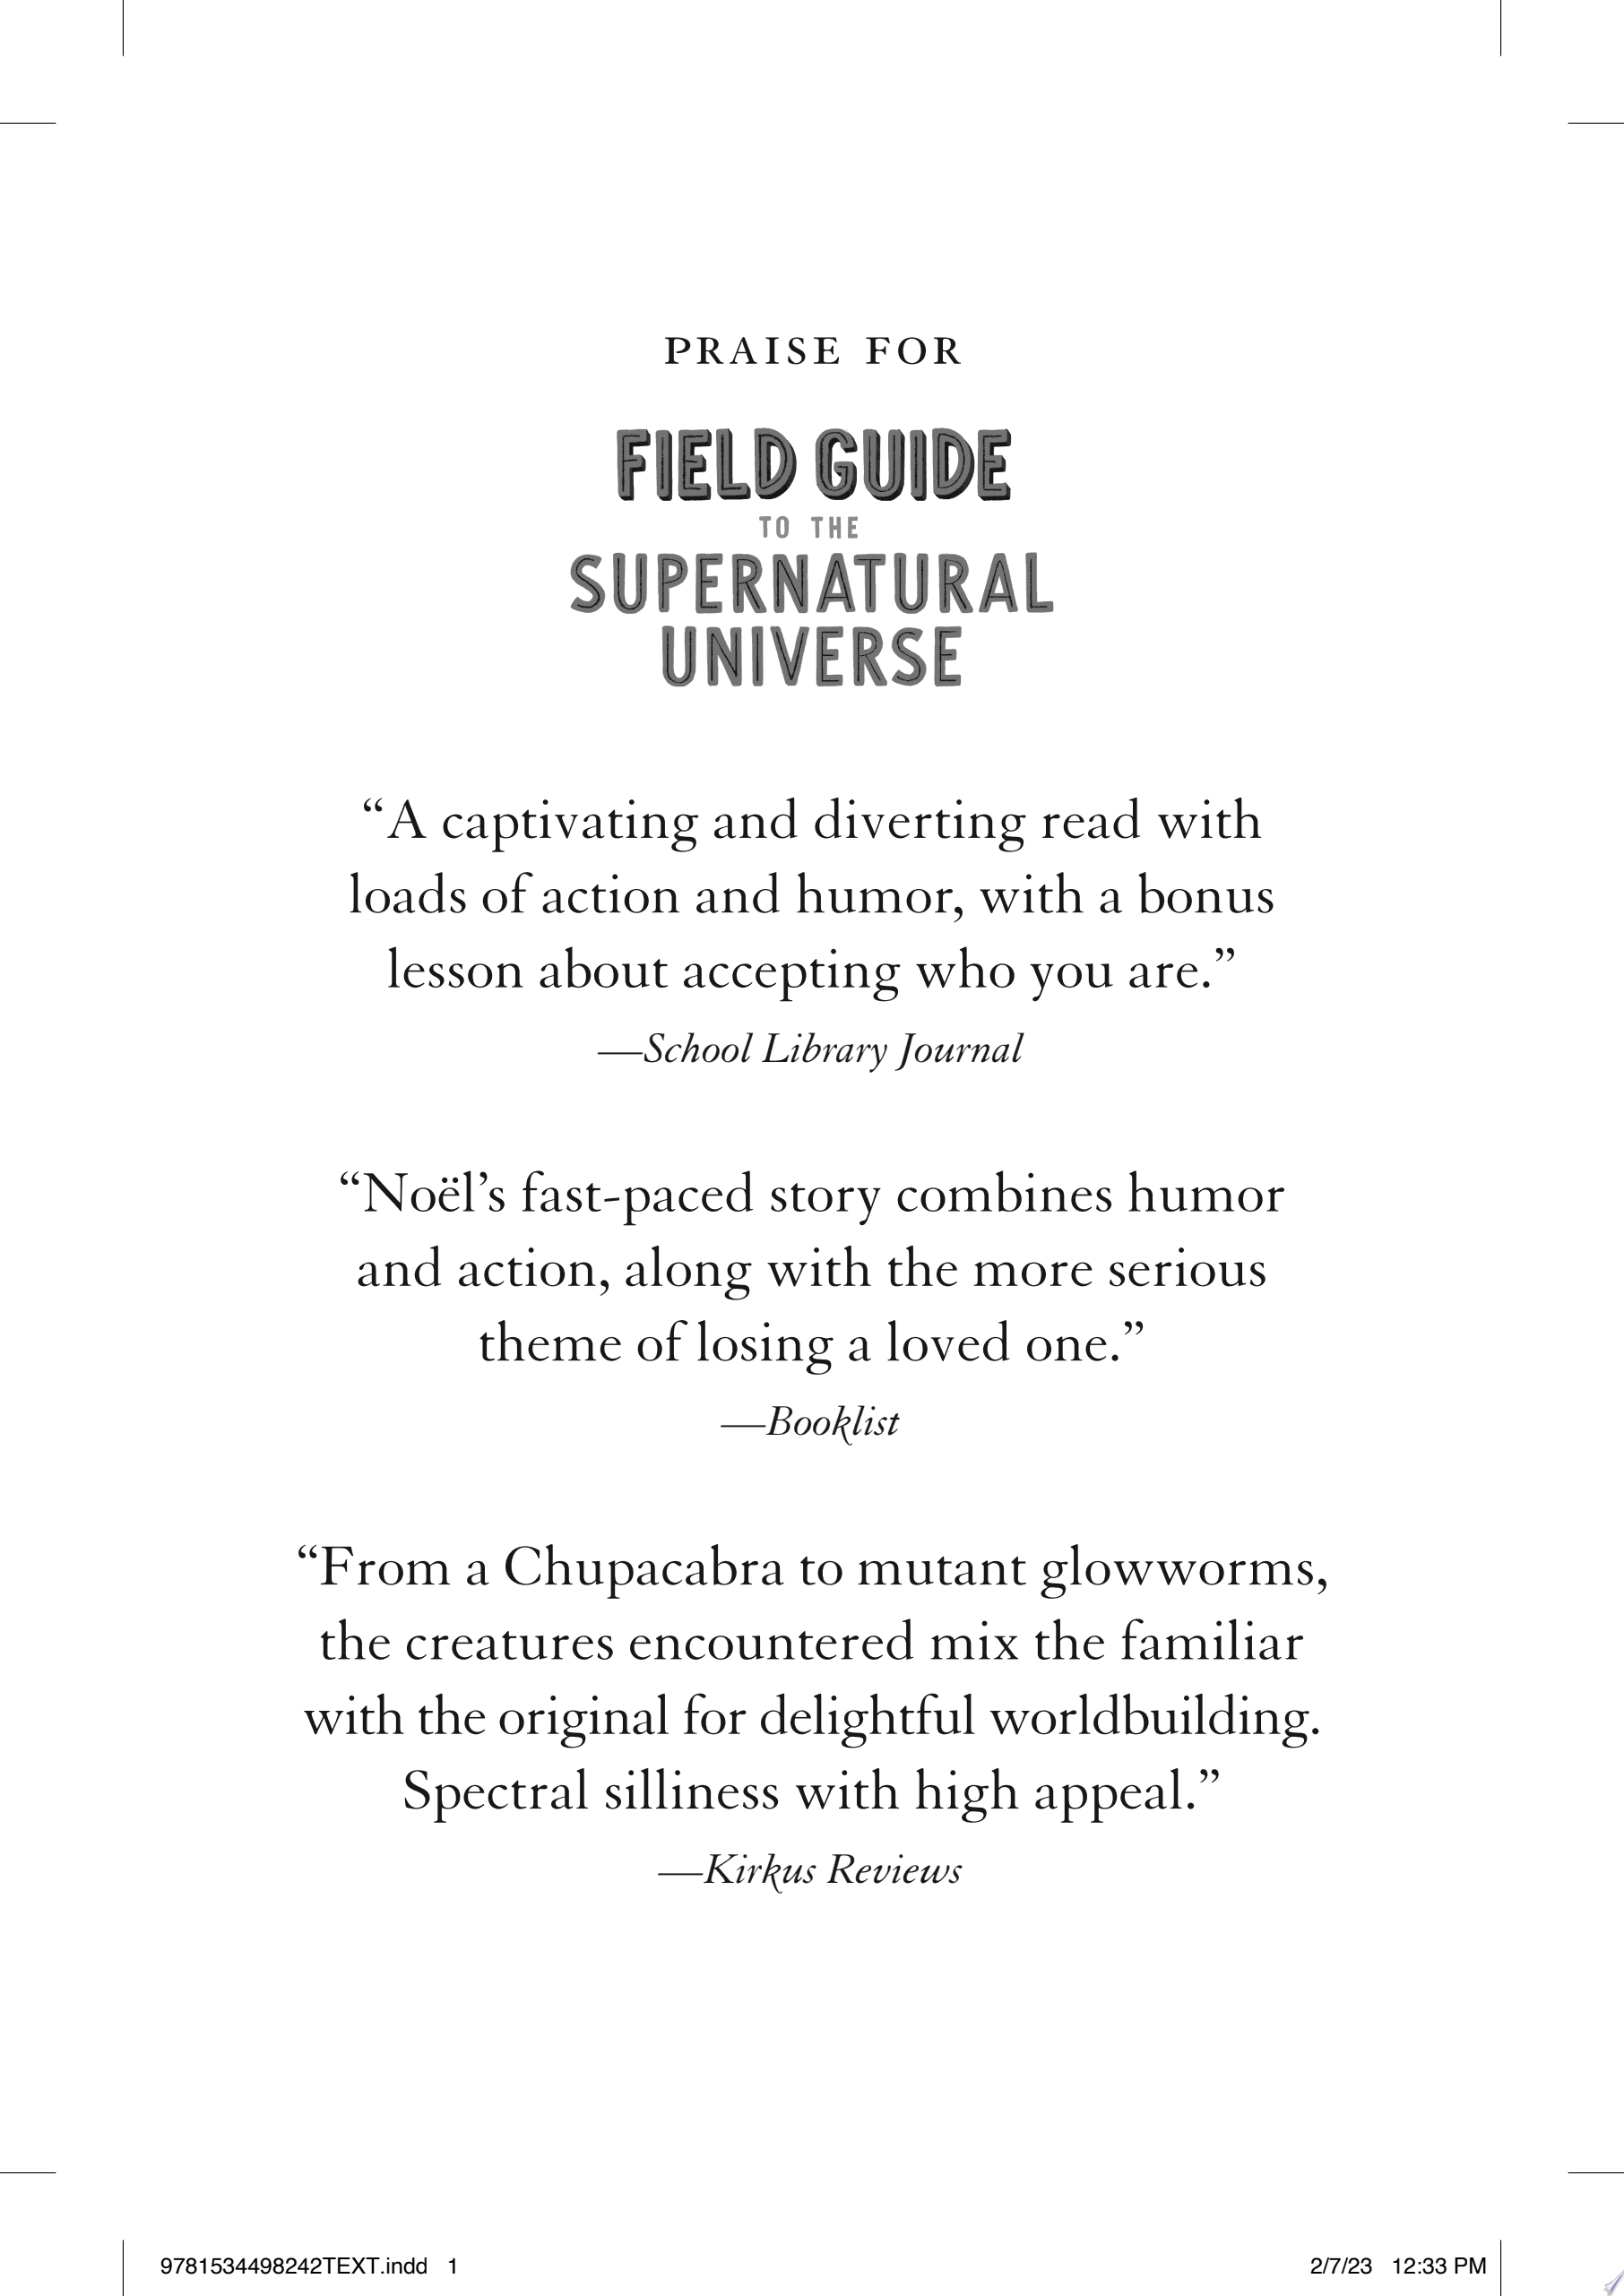 Image for "Field Guide to the Supernatural Universe"